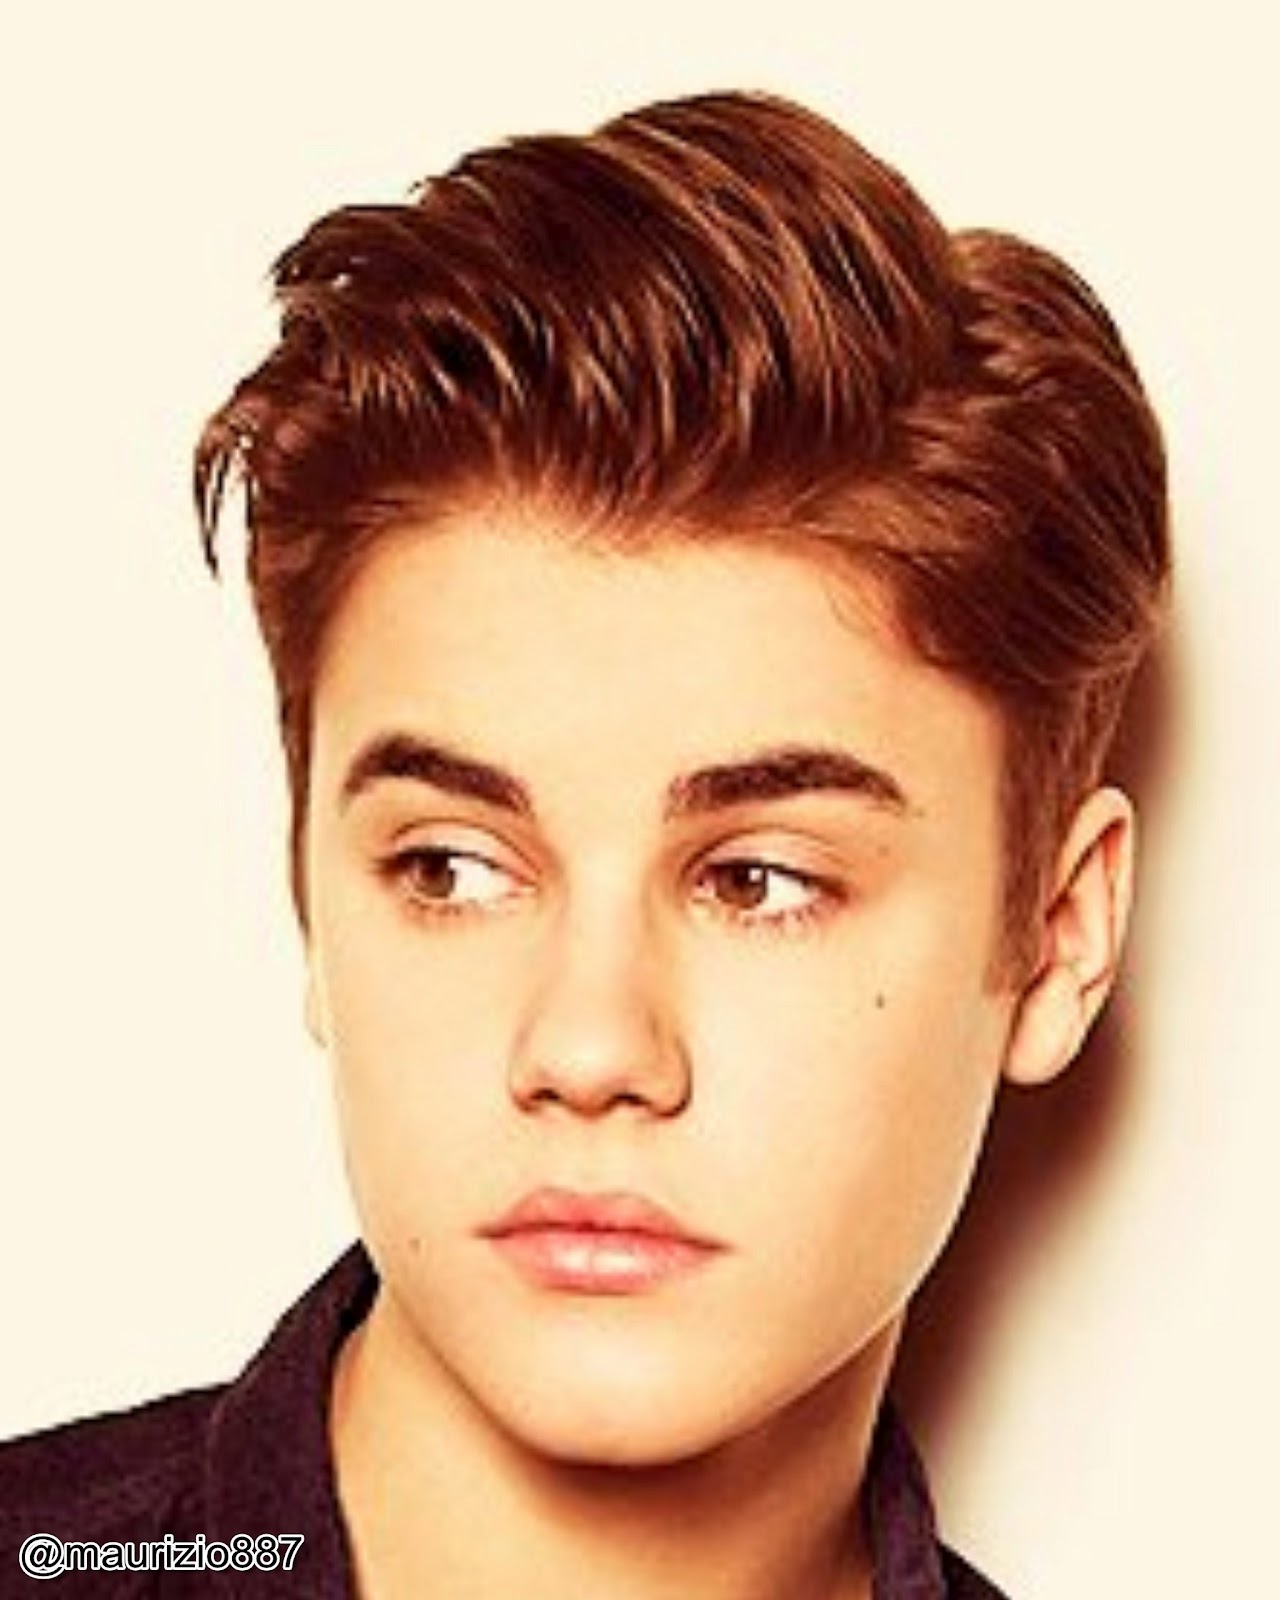 Justin Bieber New Hairstyle1280 x 1600